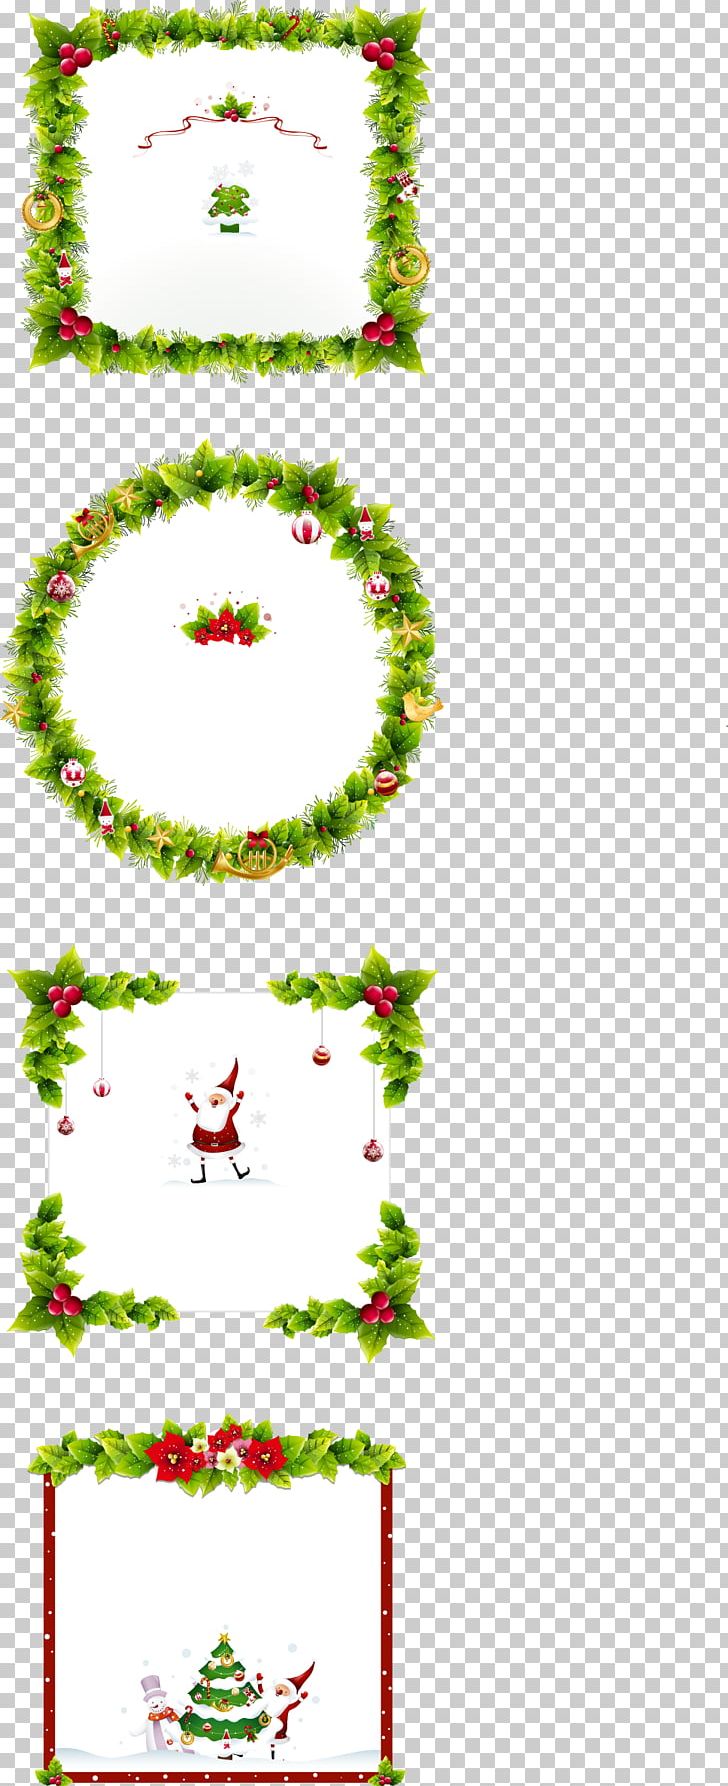 Christmas Ornament Frame PNG, Clipart, Border, Border Frame, Borders Vector, Certificate Border, Christmas Card Free PNG Download